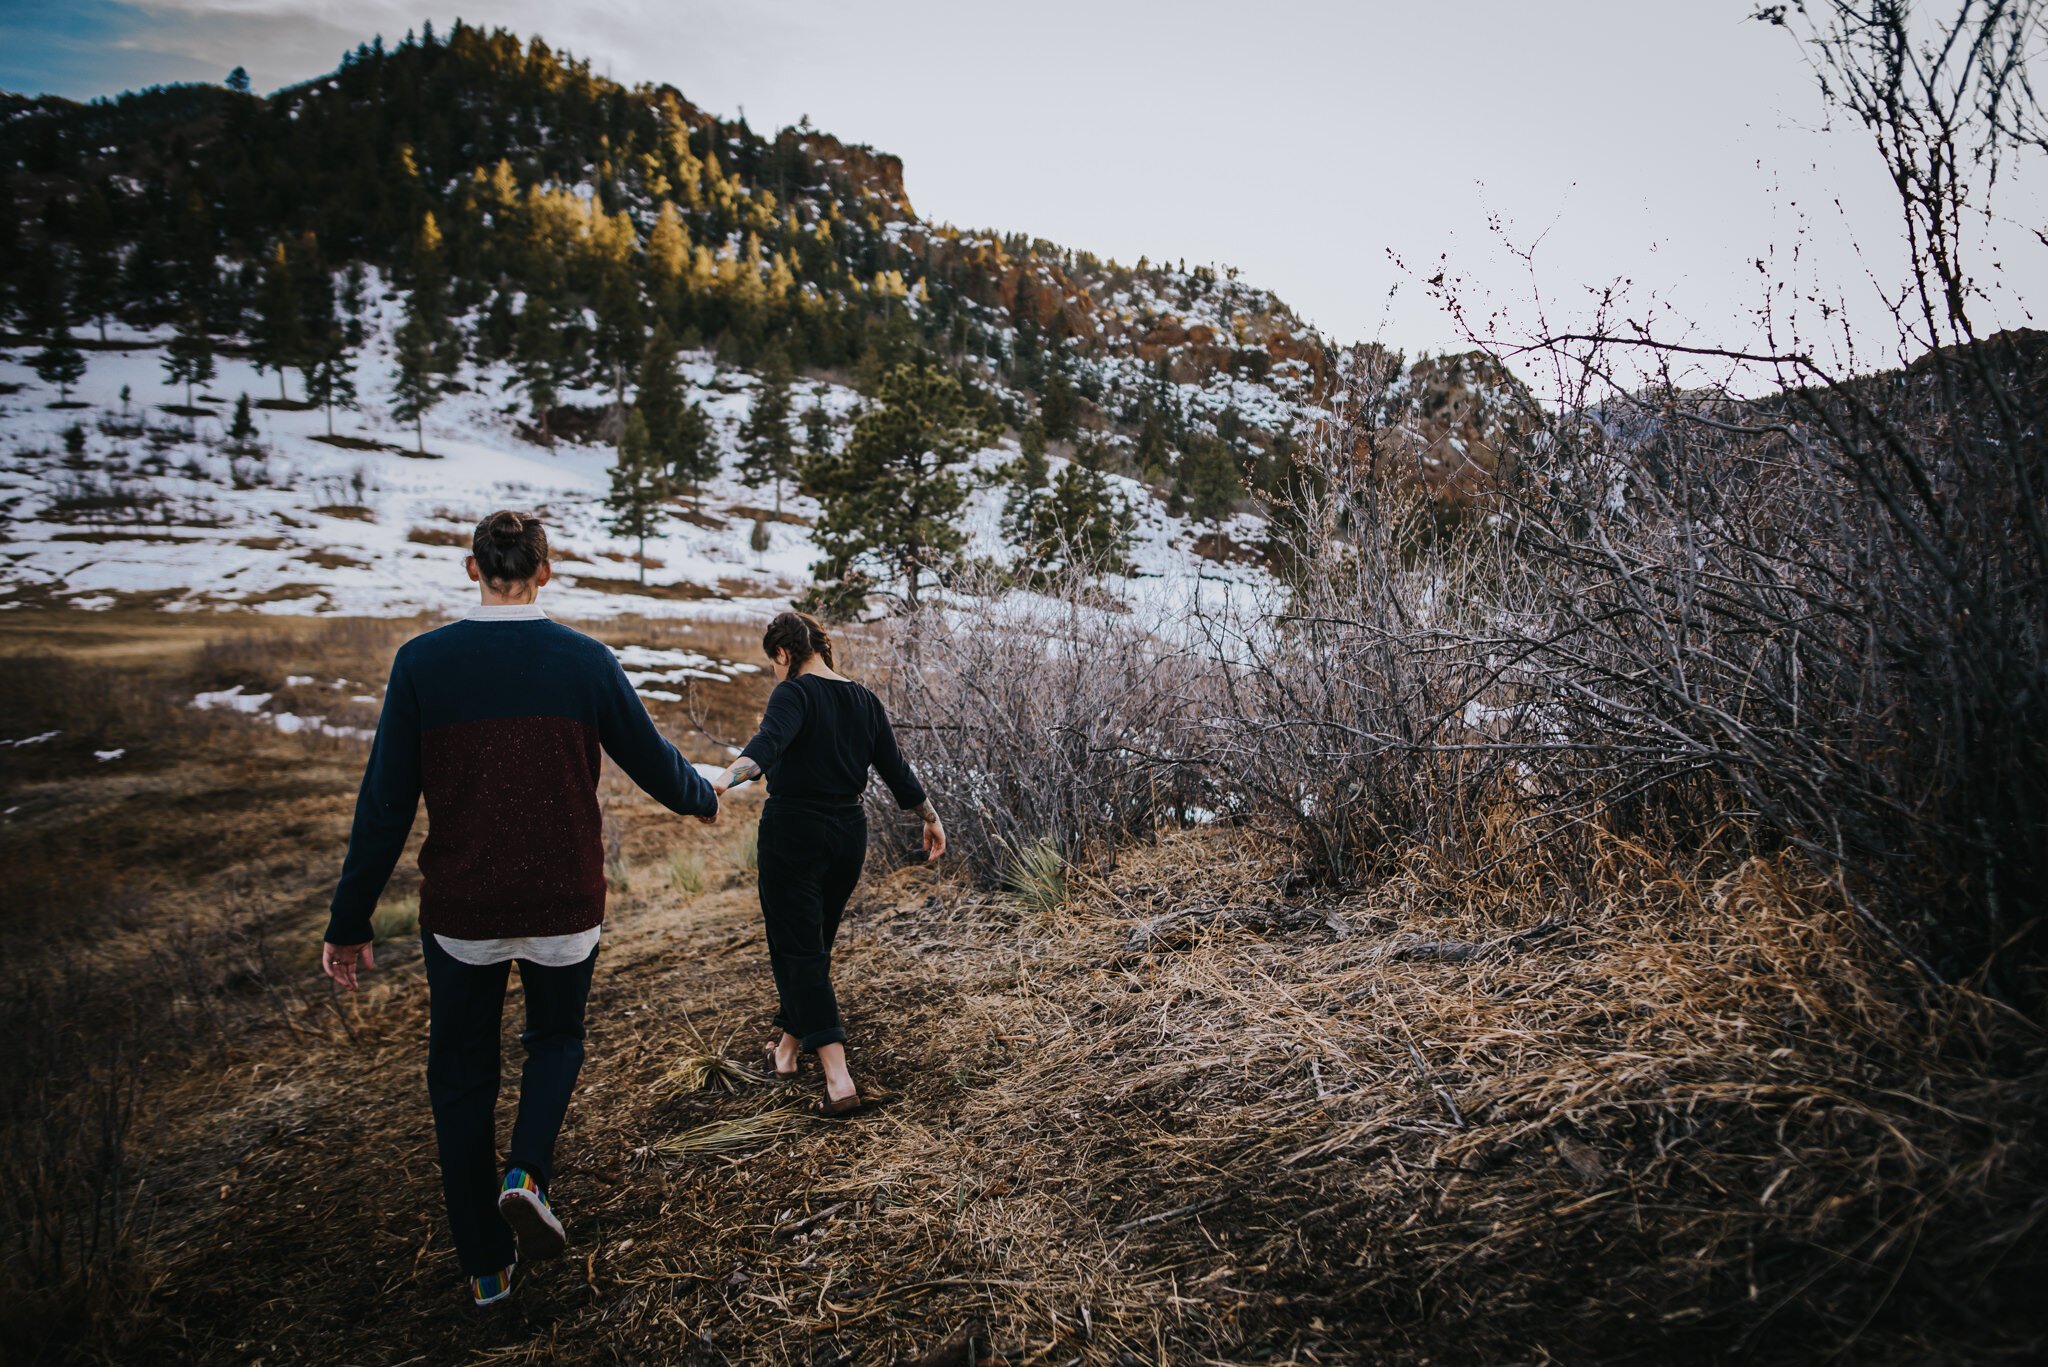 Yulia+and+Logan+Couples+Session+Colorado+Springs+Colorado+Sunset+Cheyenne+Canyon+Husband+Wife+Wild+Prairie+Photography-12-2020.jpeg